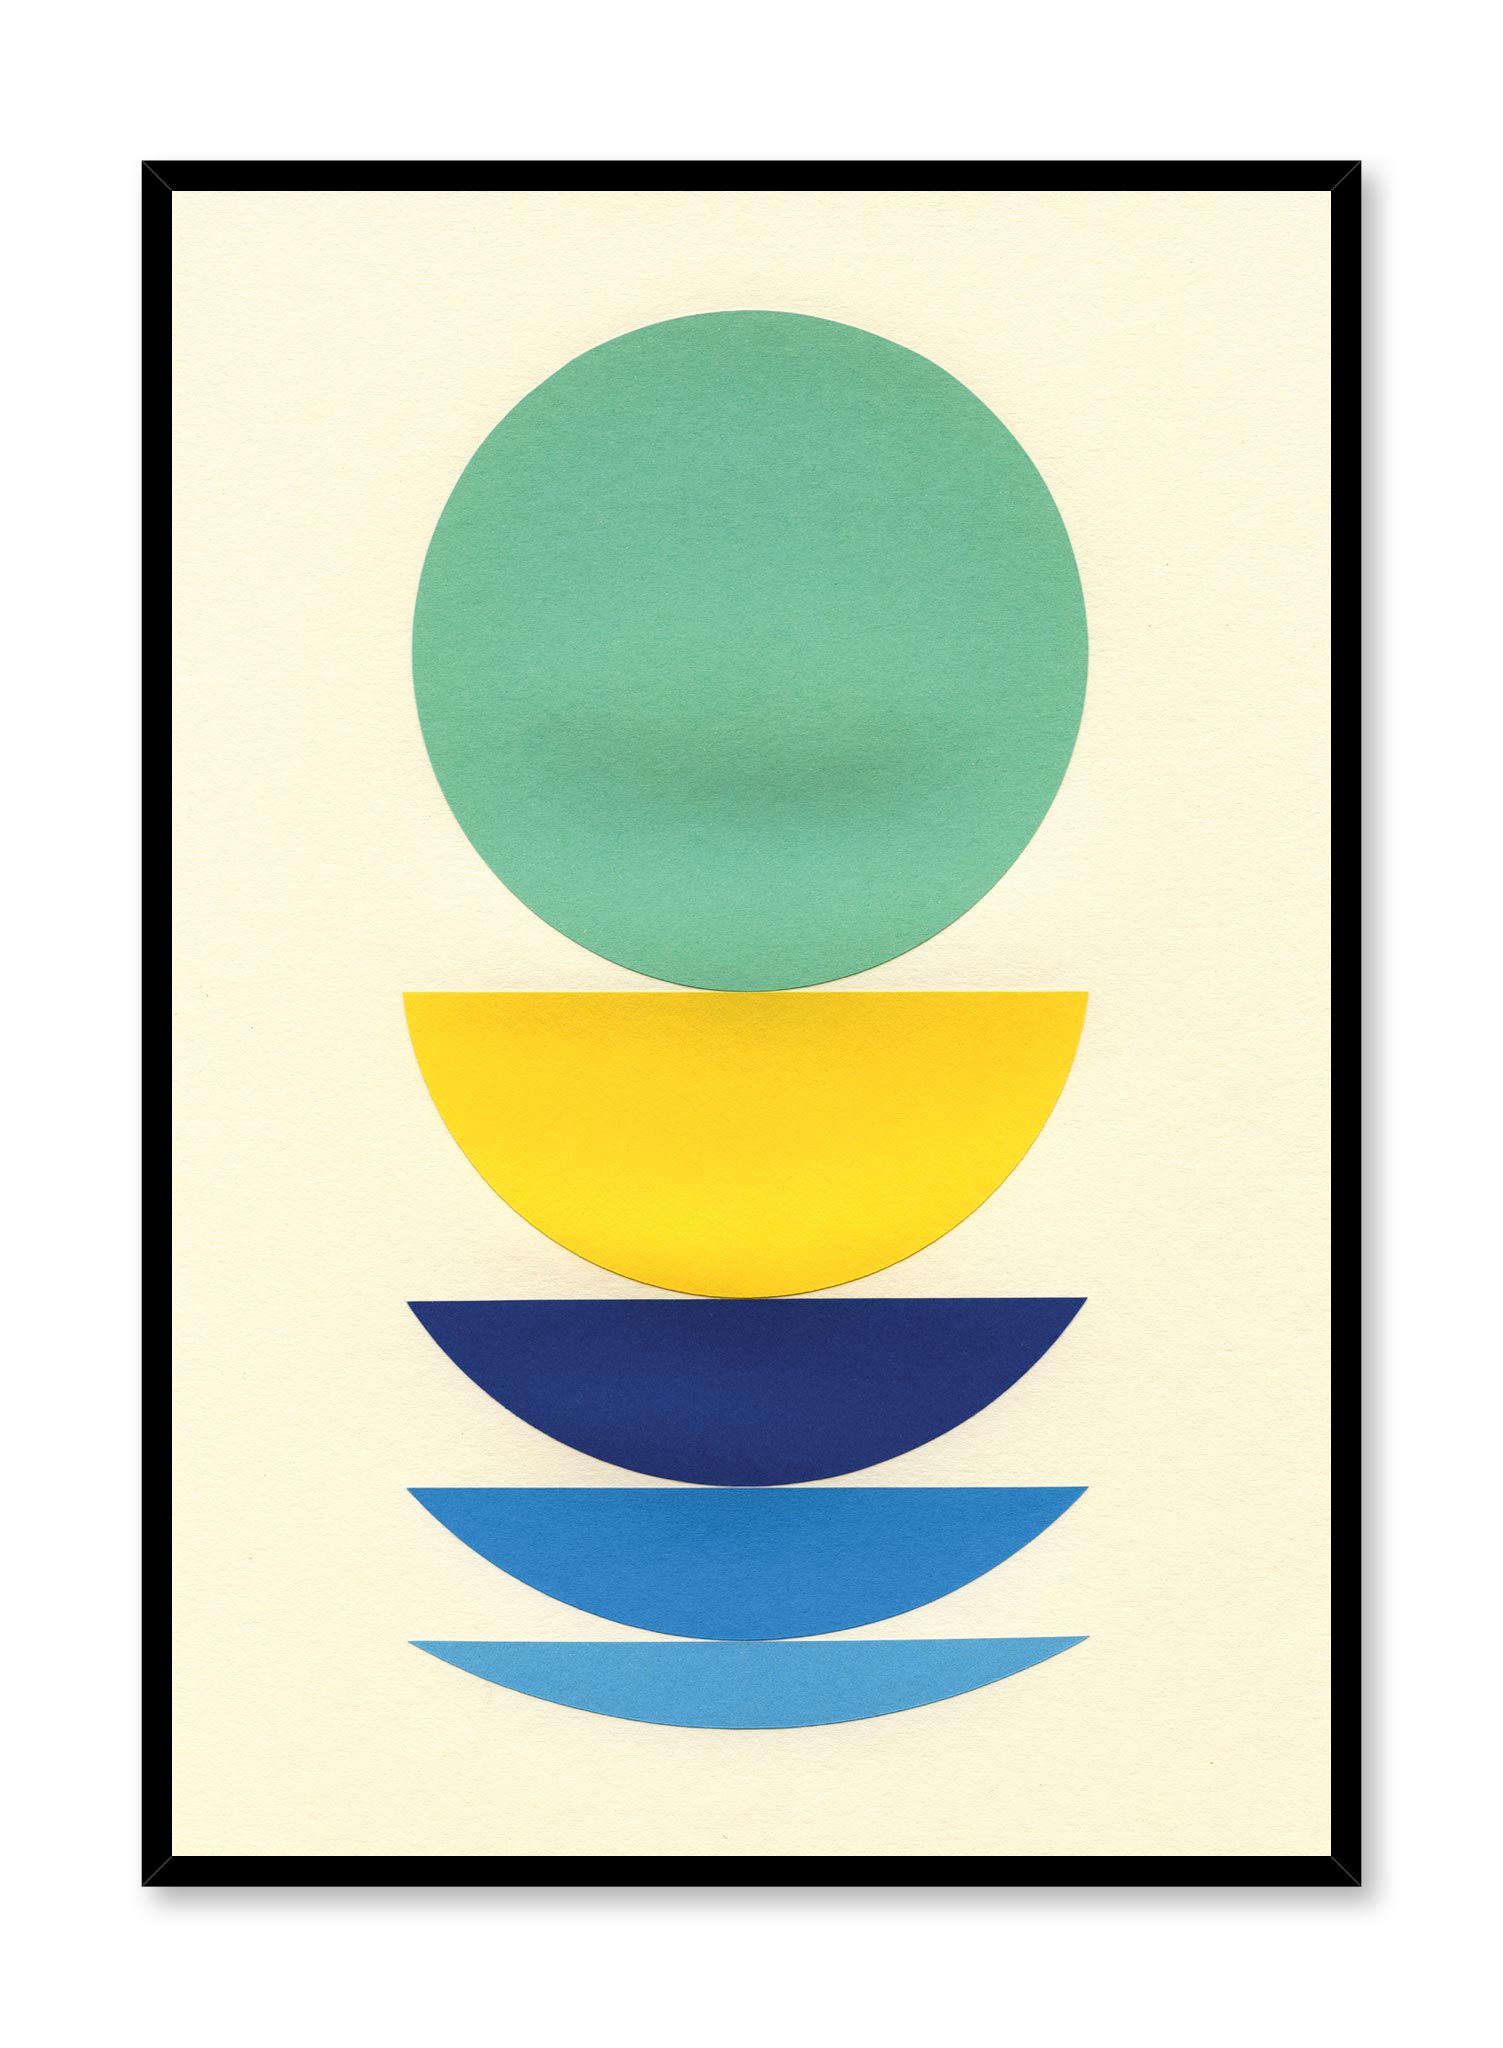 Modern minimalist poster by Opposite Wall with abstract collage illustration of colourful shapes